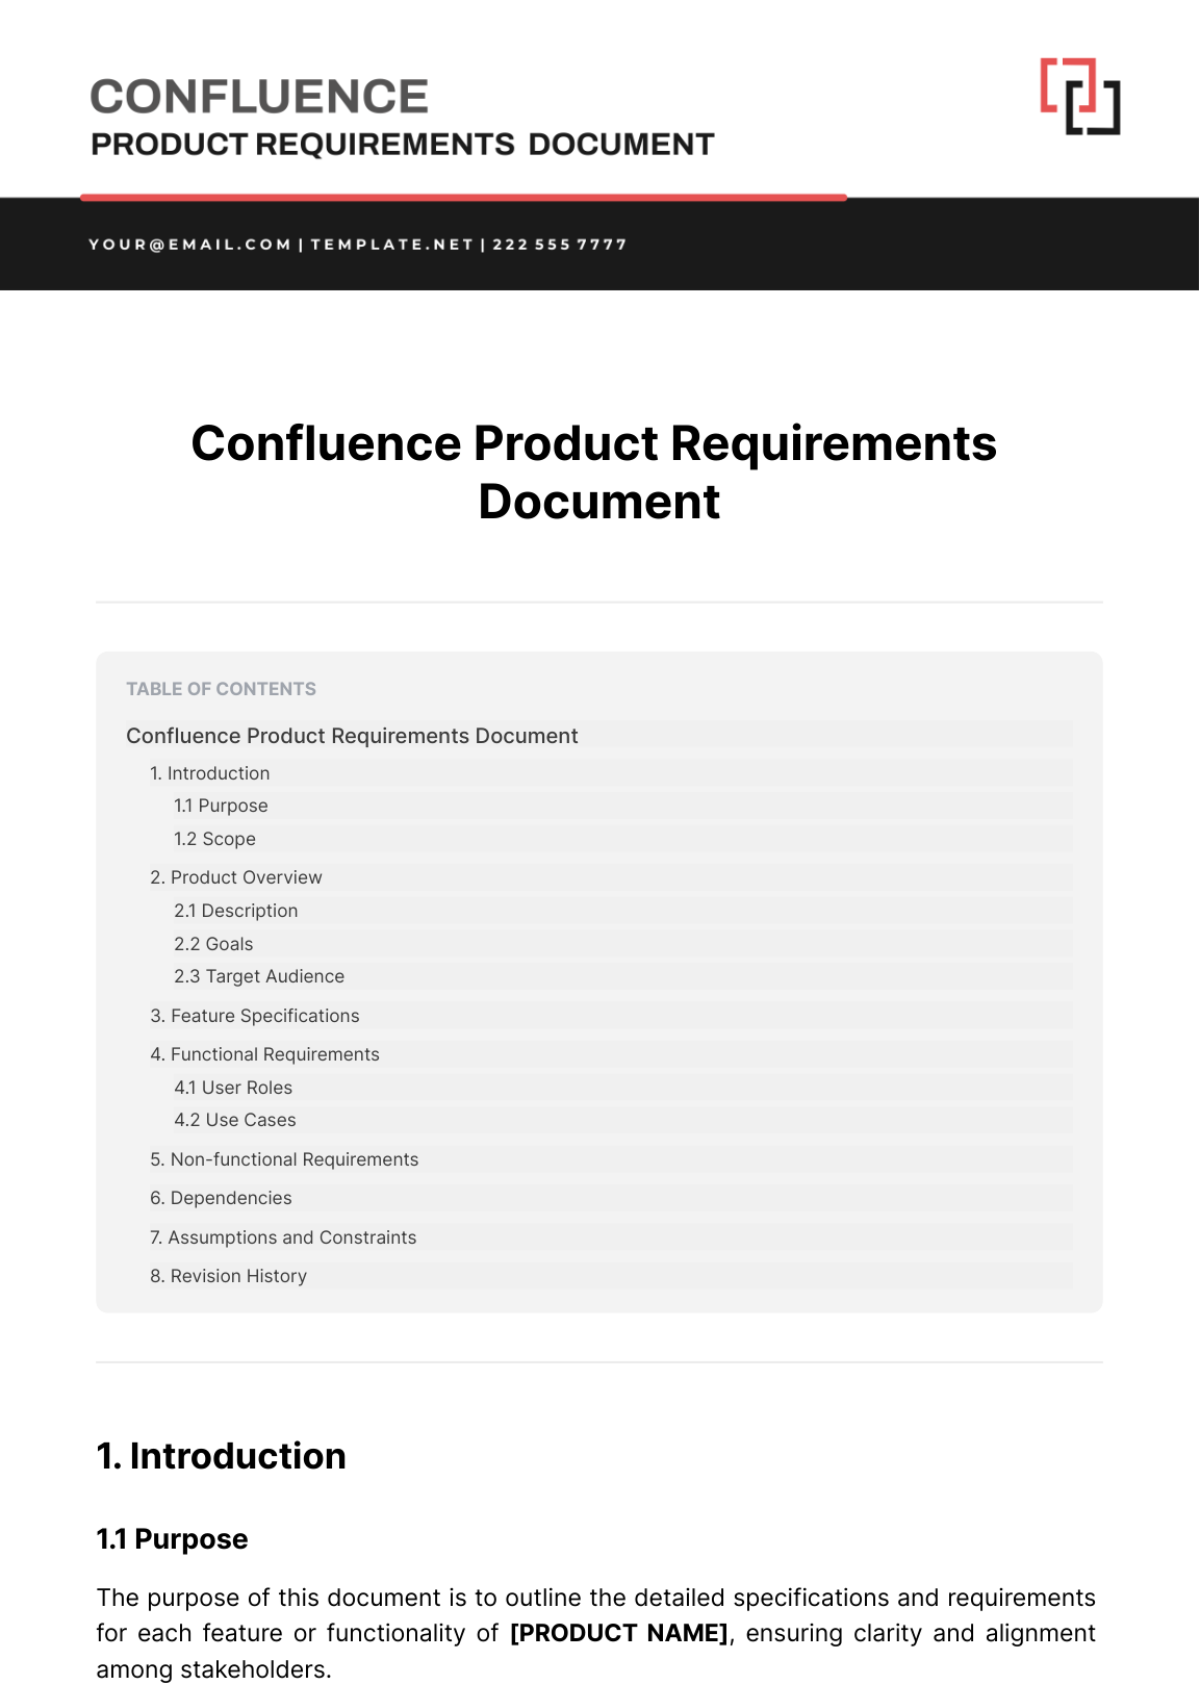 Confluence Product Requirements Document Template